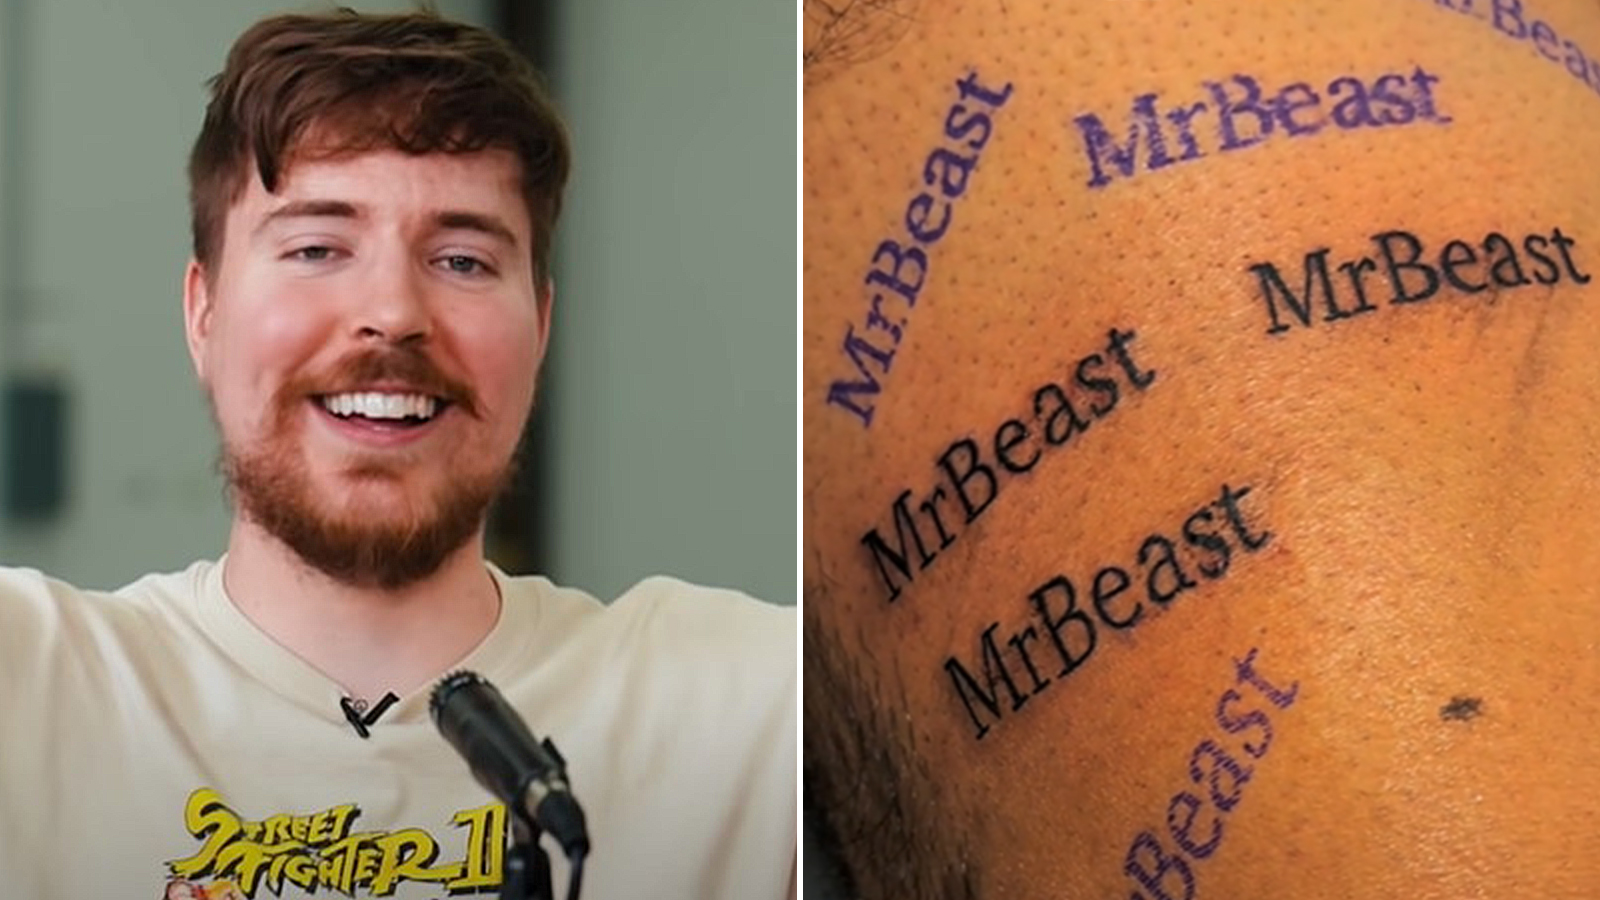 In this video at 1005 Chris said that if the video was the most liked one  in YouTube he would get shopmrbeast tattooed on him Im waiting  rMrBeast